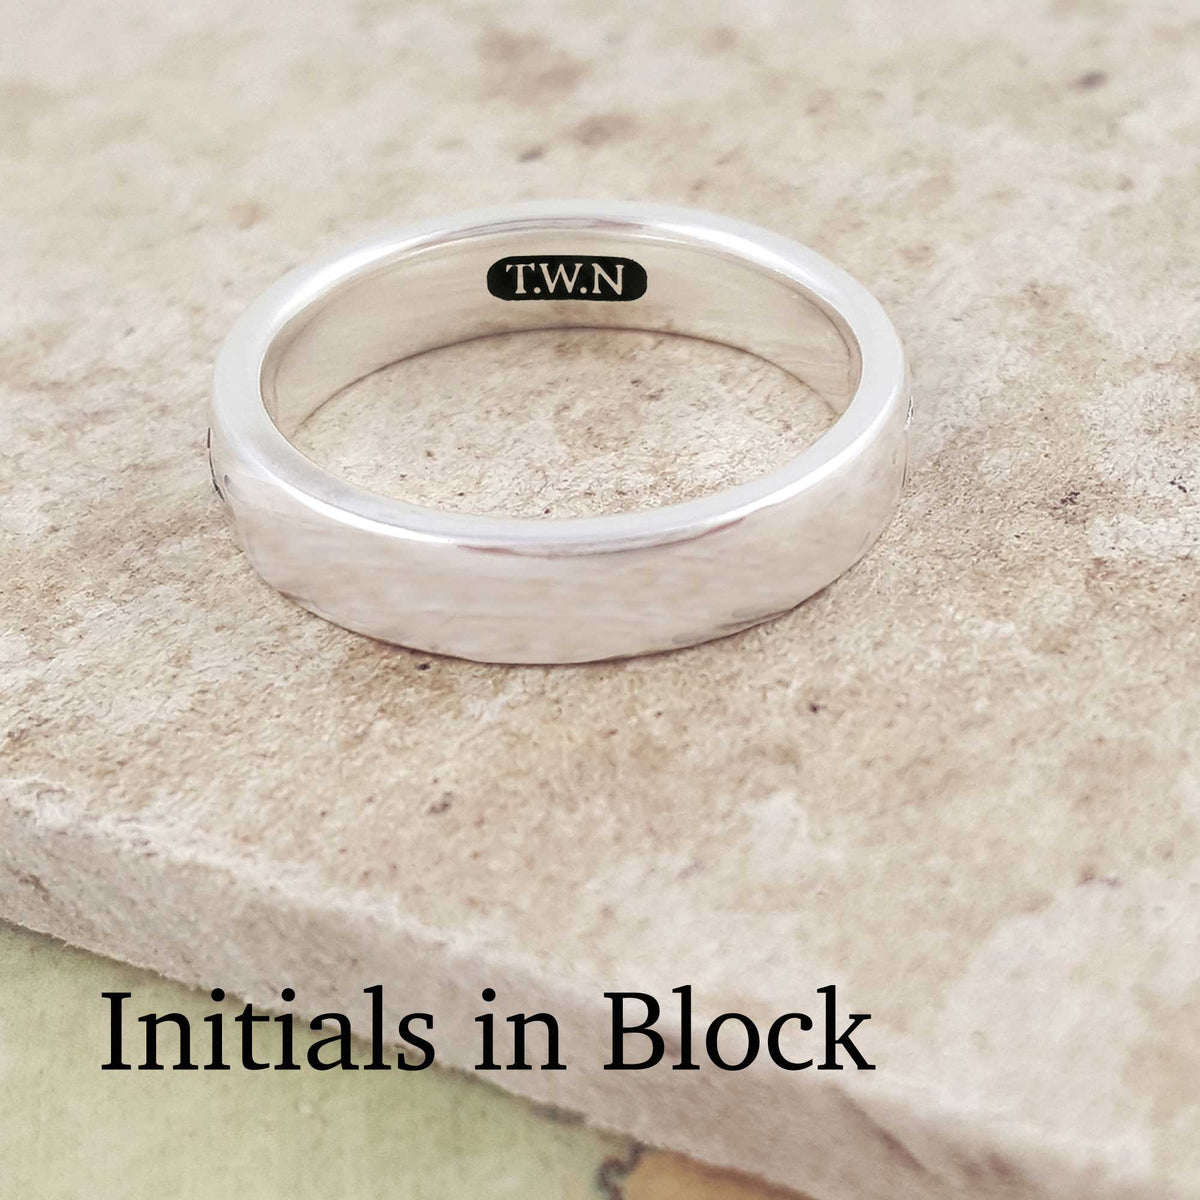 personalised unisex silver ring engraved with custom message